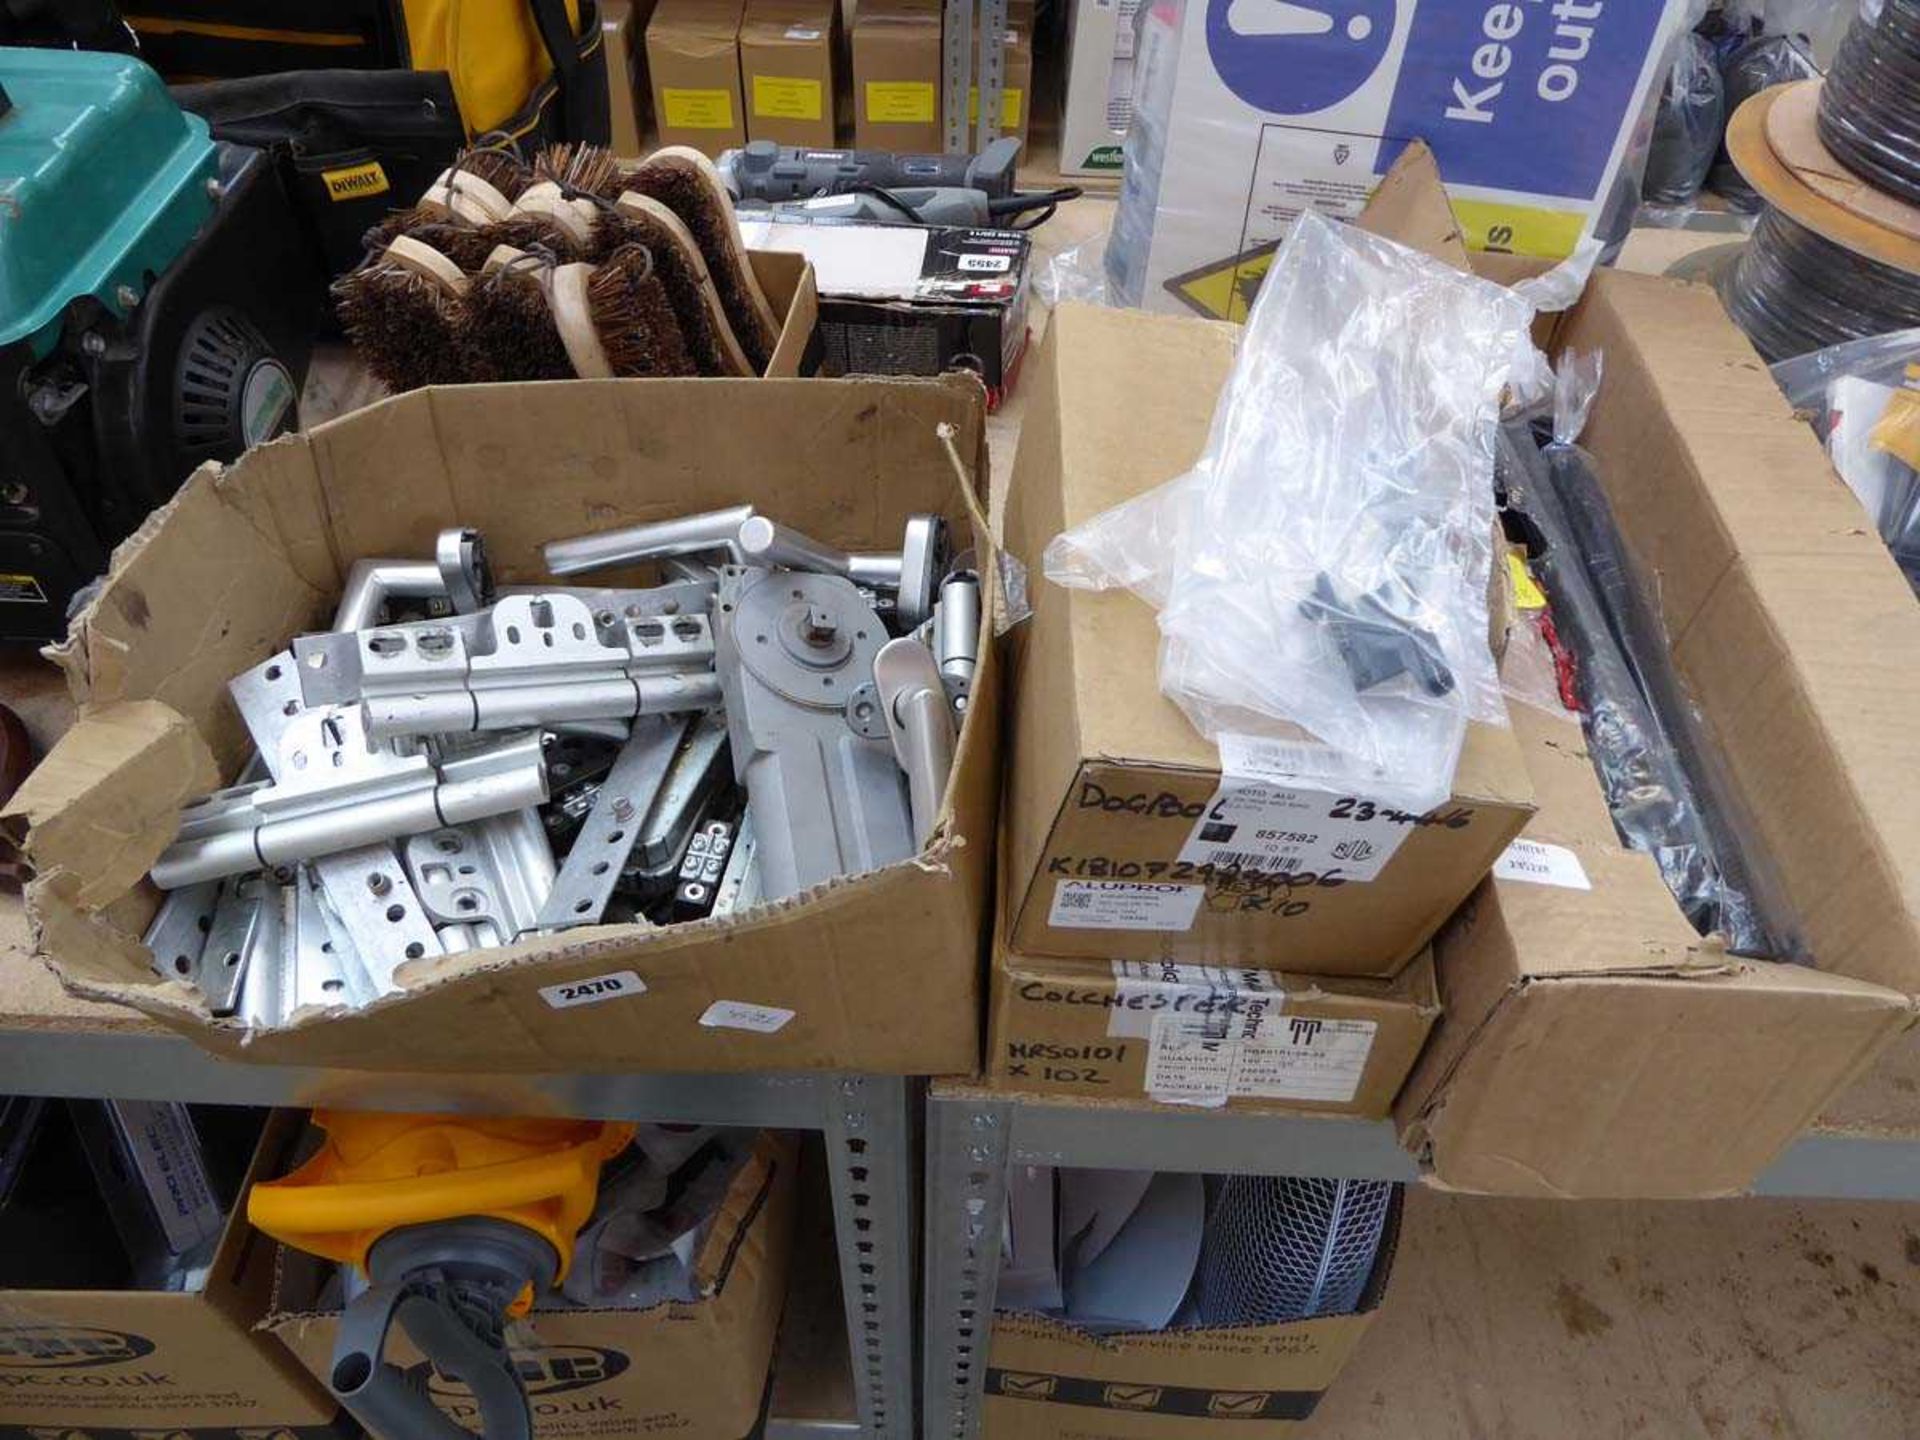 Box containing various door handles, hinges, etc. with 3 boxes of various vents and fixings